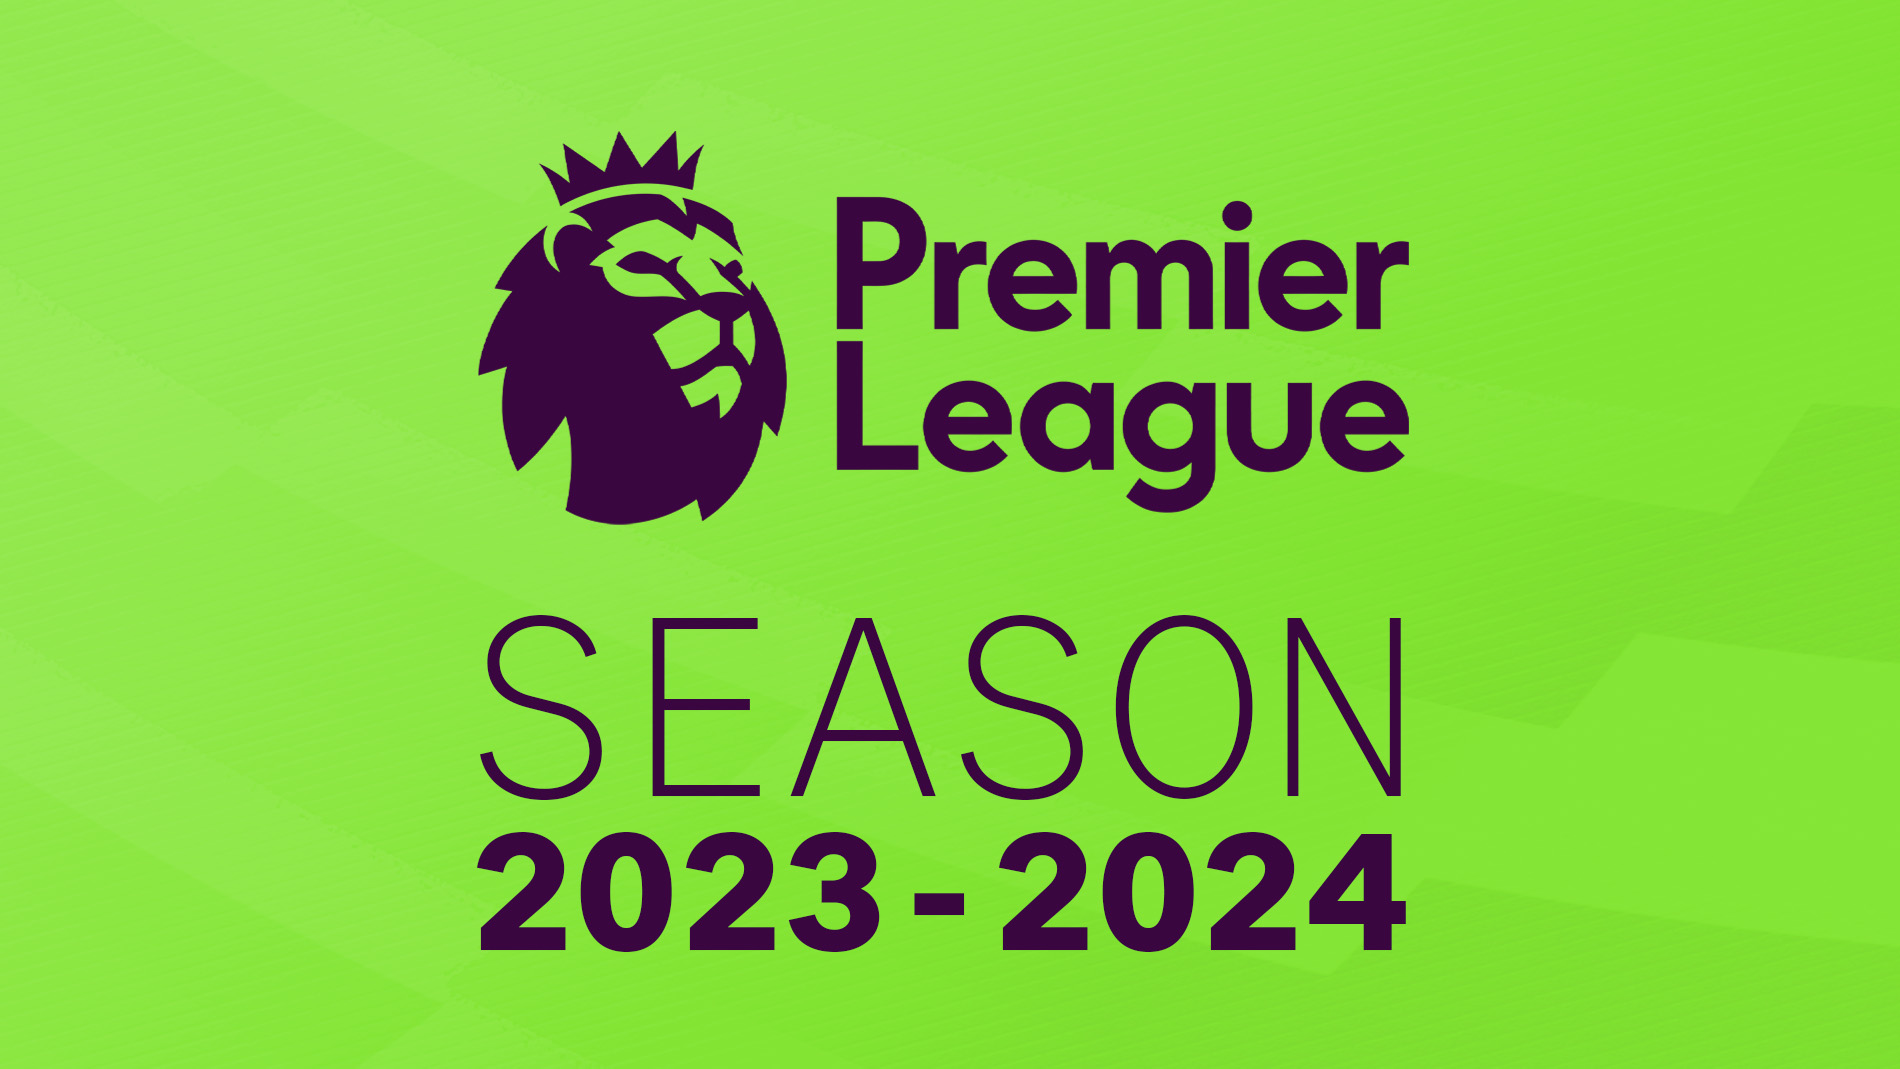 The first league. The 2023/2024 season begins today: 20 clubs will